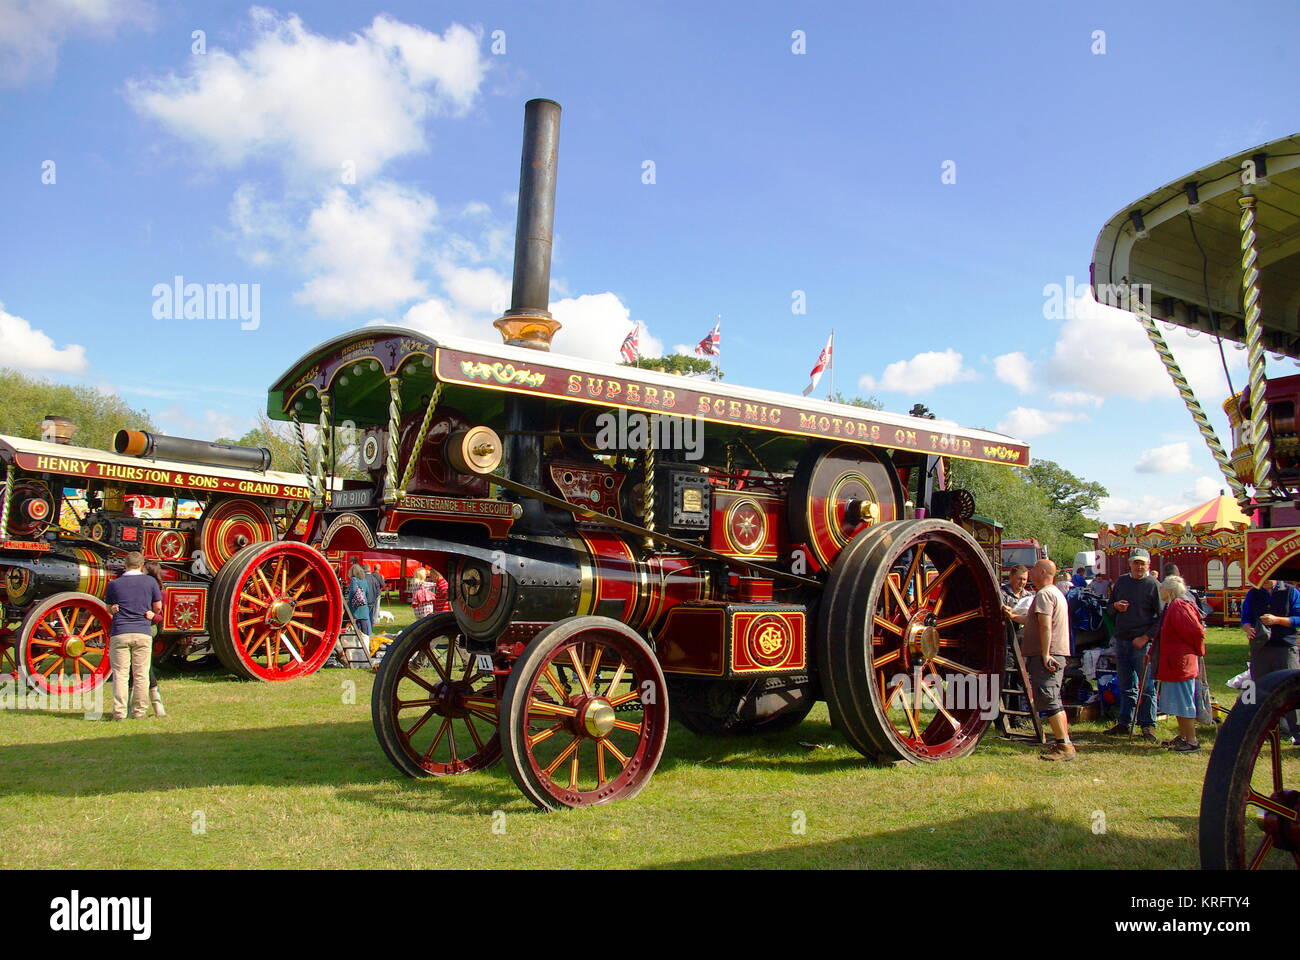 Welland Steam Fair, near Malvern, Worcestershire, with all kinds of farming vehicles and fairground engines on display. Seen here are two brightly coloured fairground engines. Stock Photo